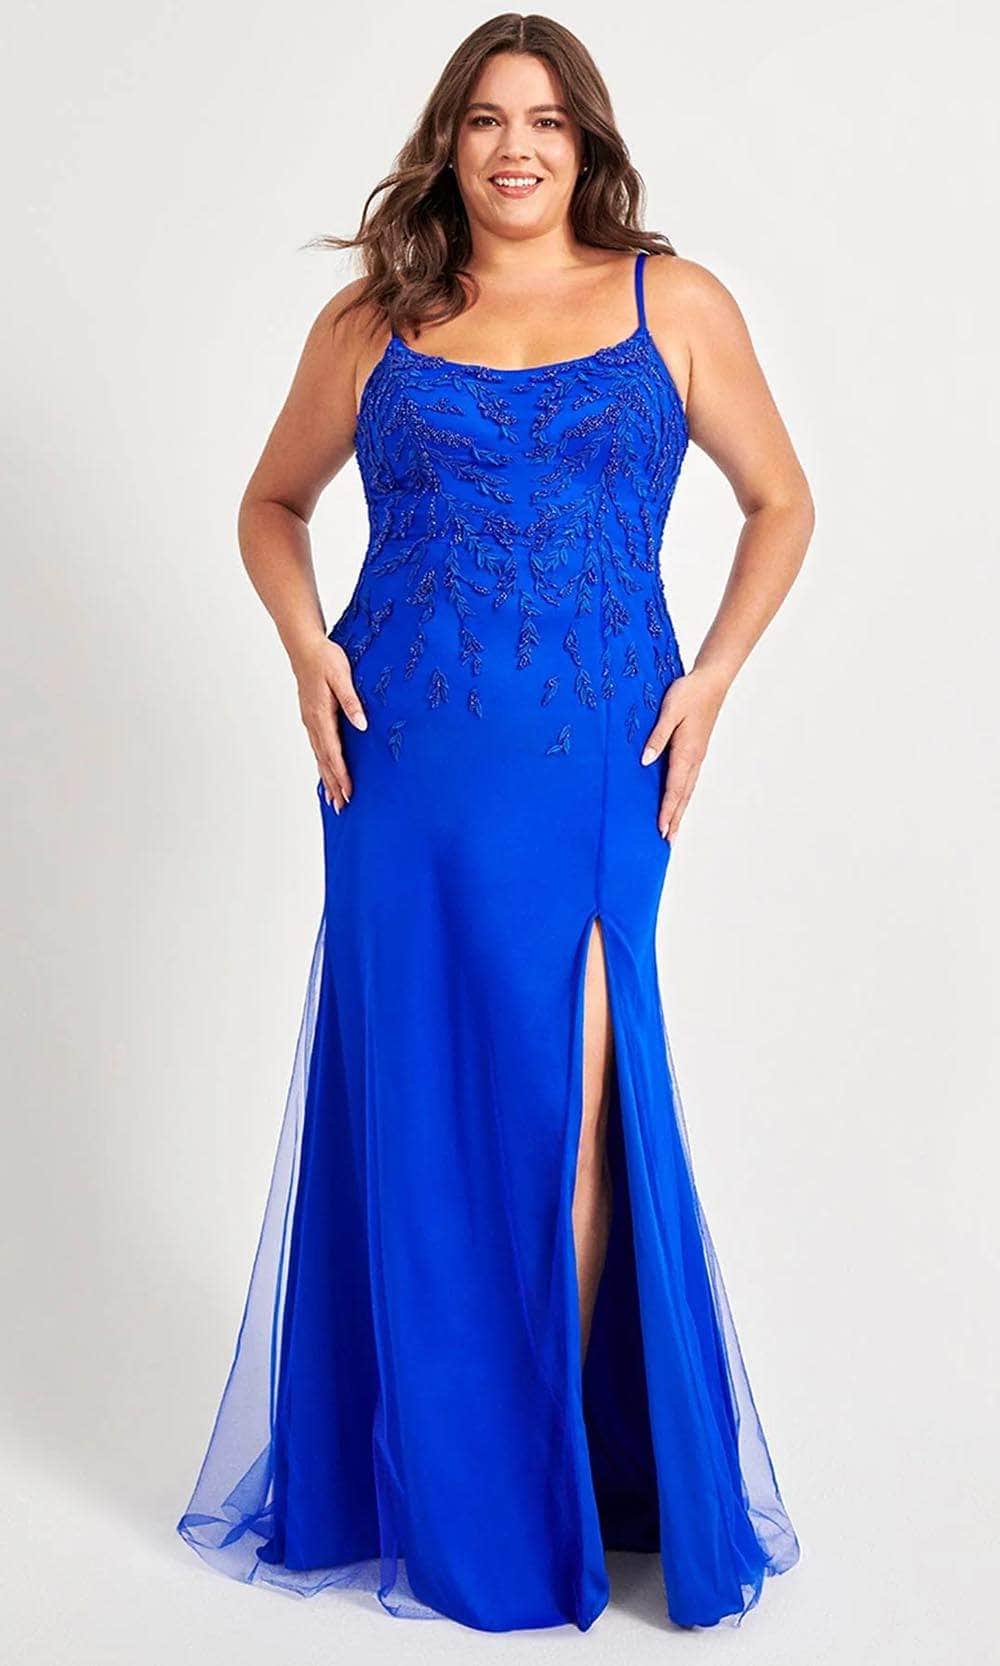 Image of Faviana 9559 - Beaded Lace Scoop Prom Gown